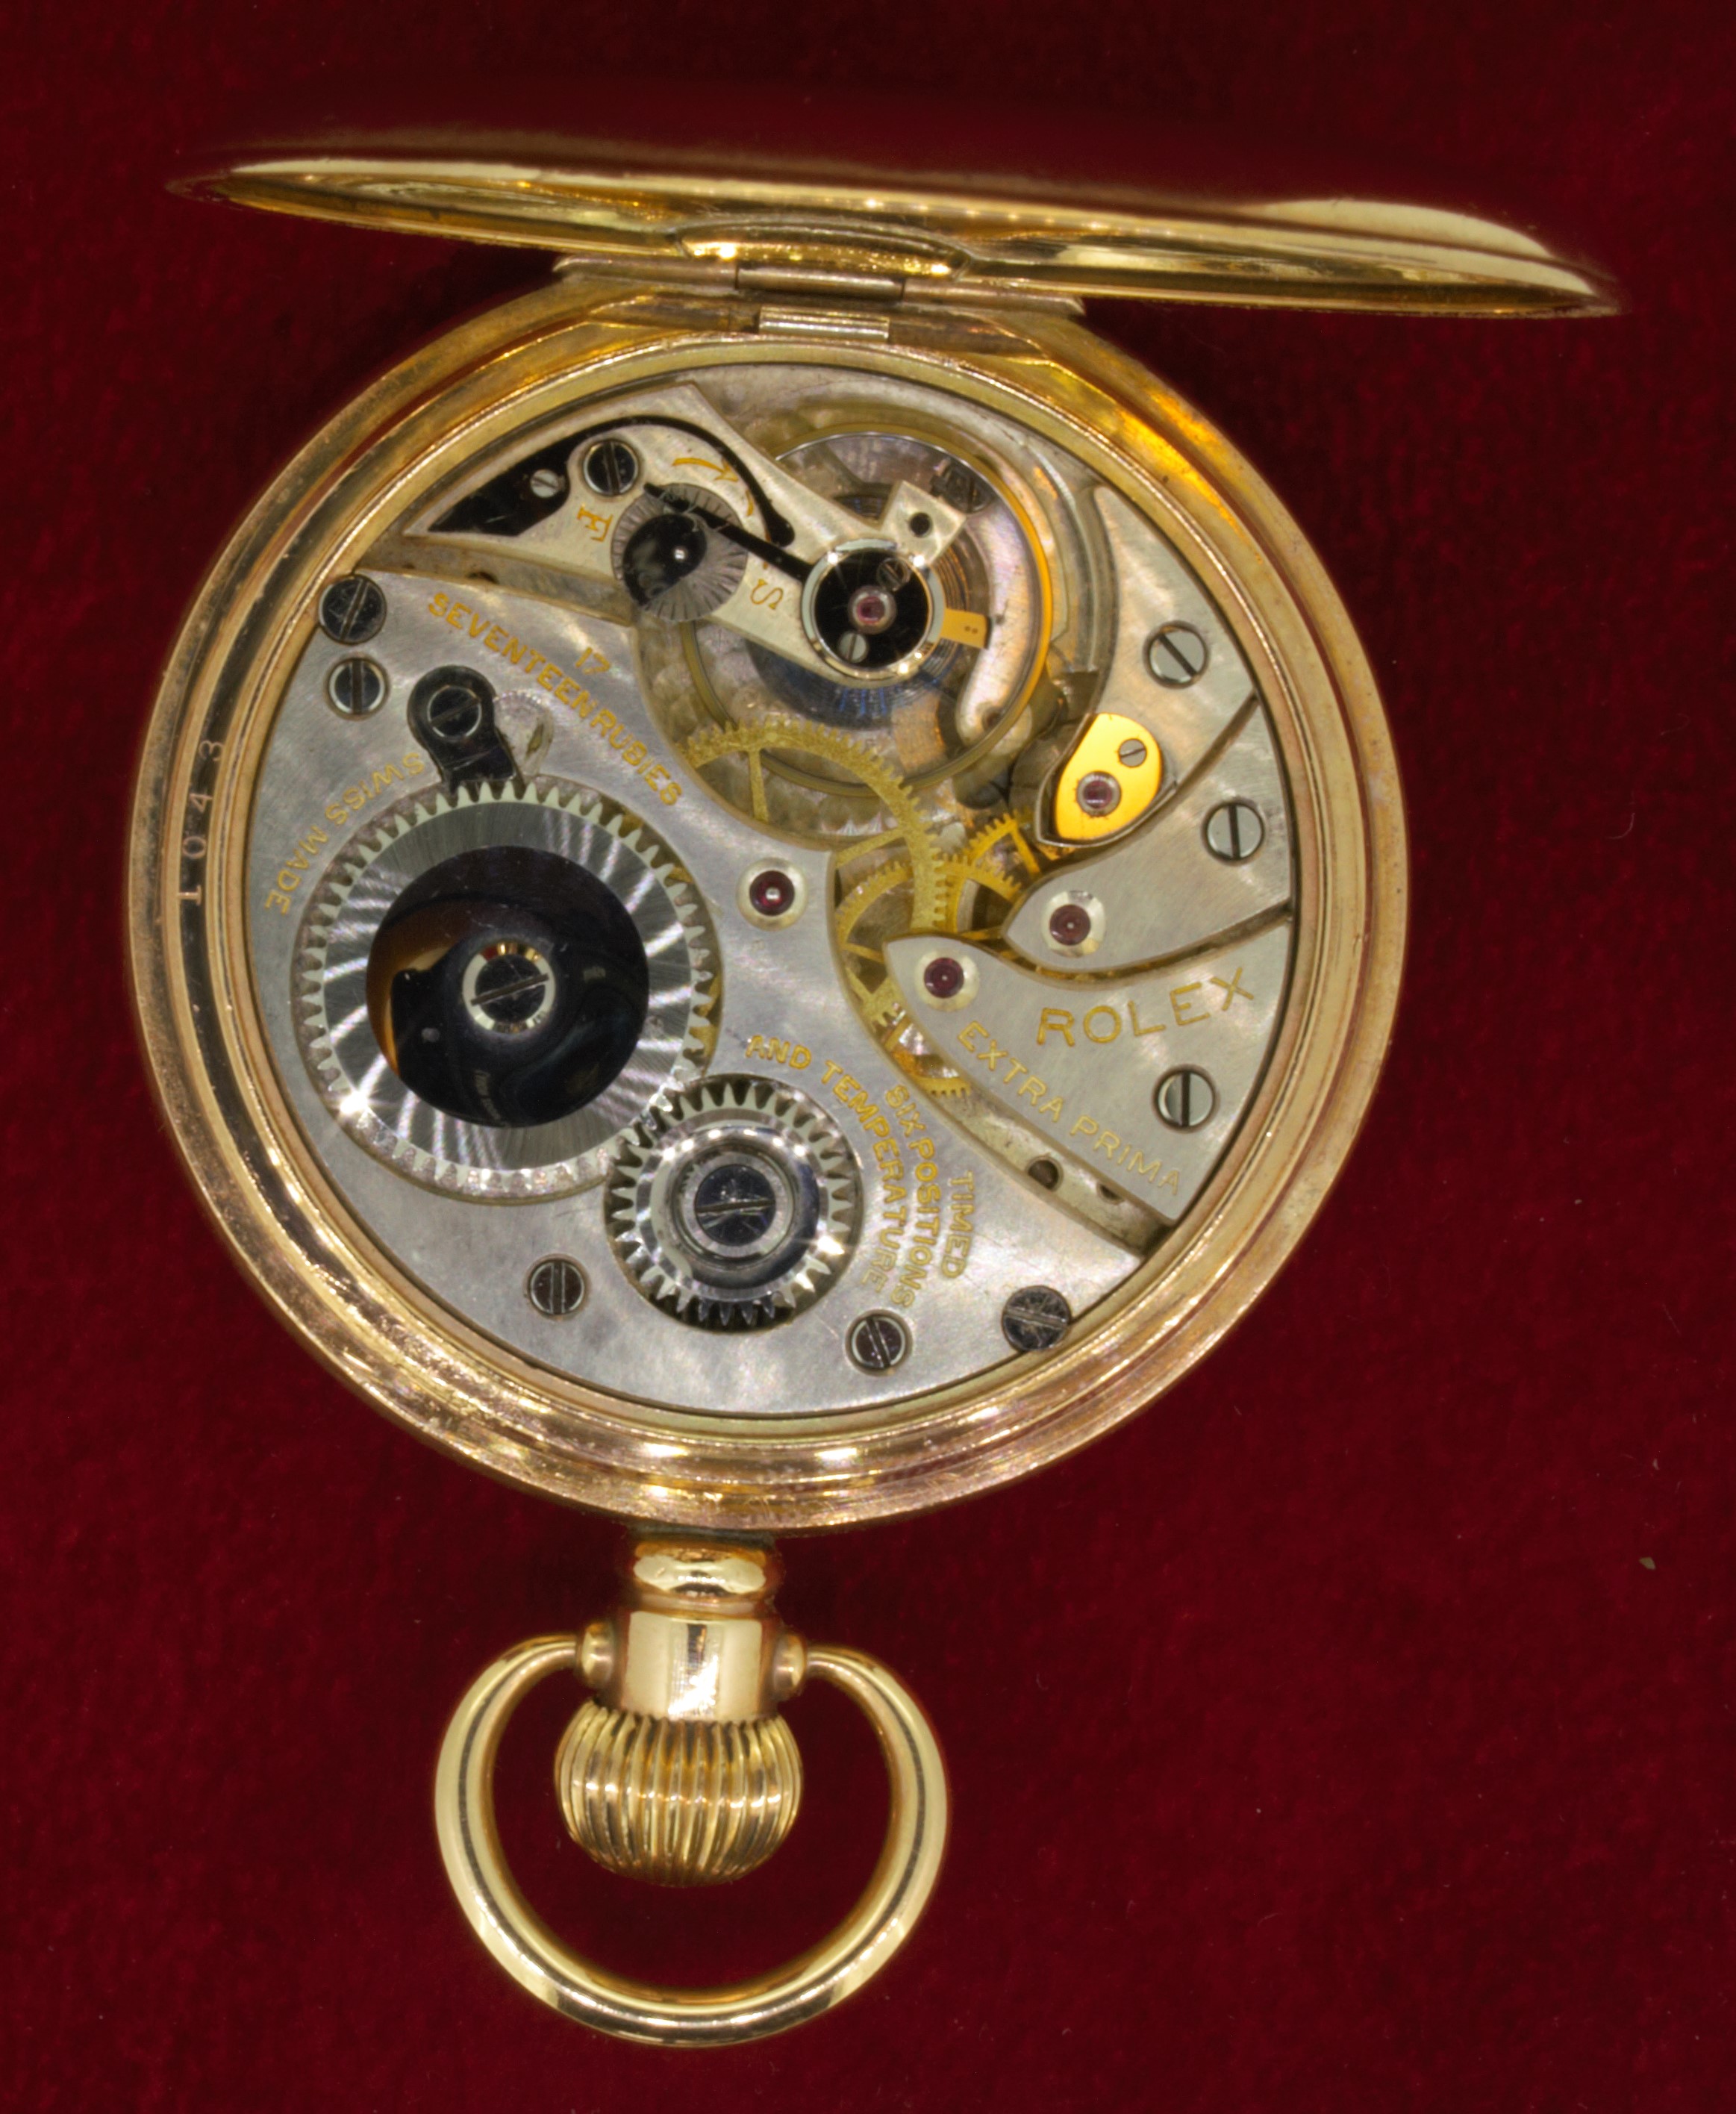 Vintage Rolex Full Hunter Pocket Watch with a Gold Plated Dennison Case - Image 4 of 6